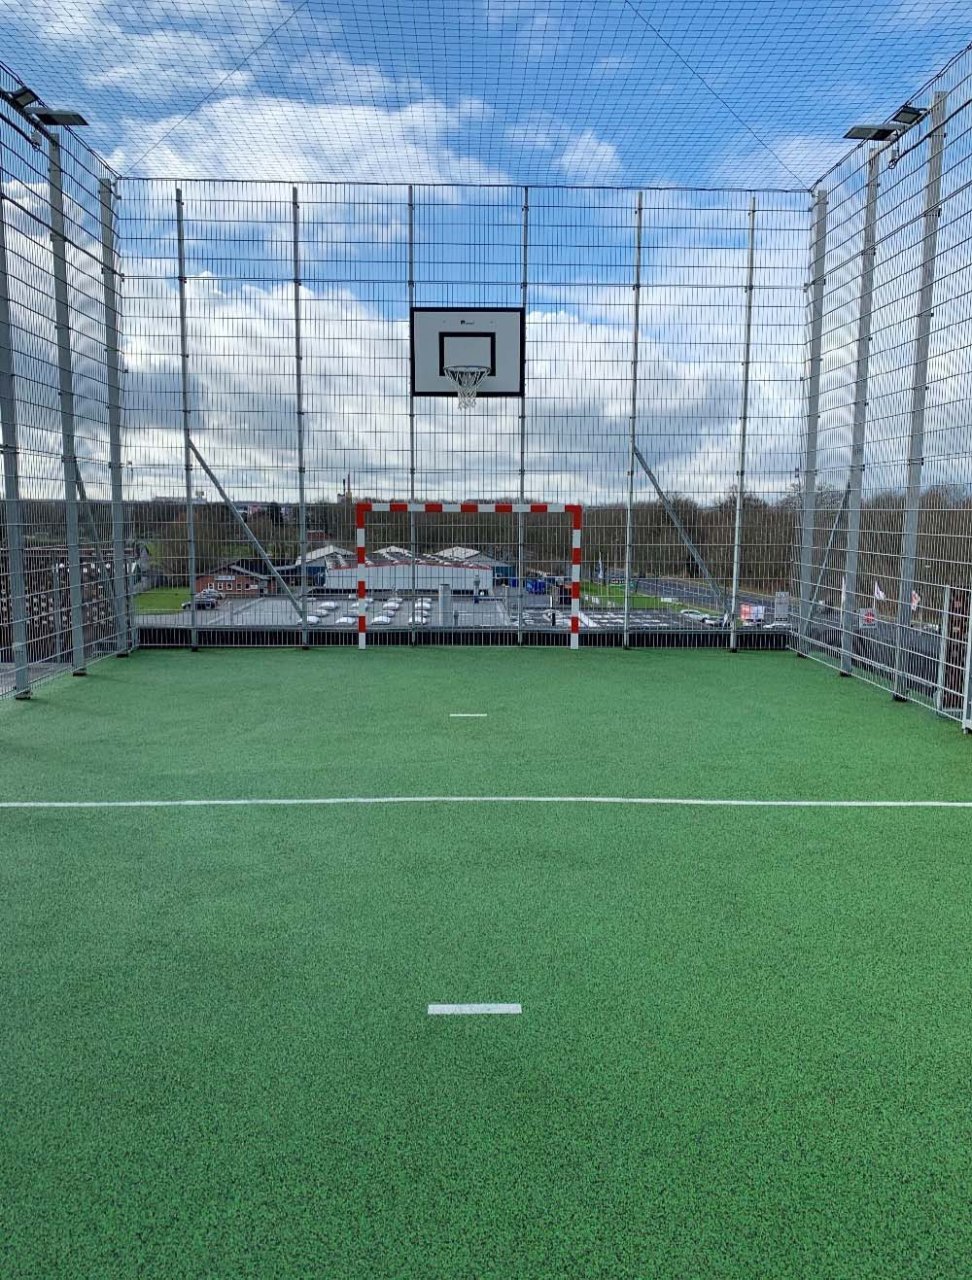 Image of Odense Basketball Court on Roof-Top